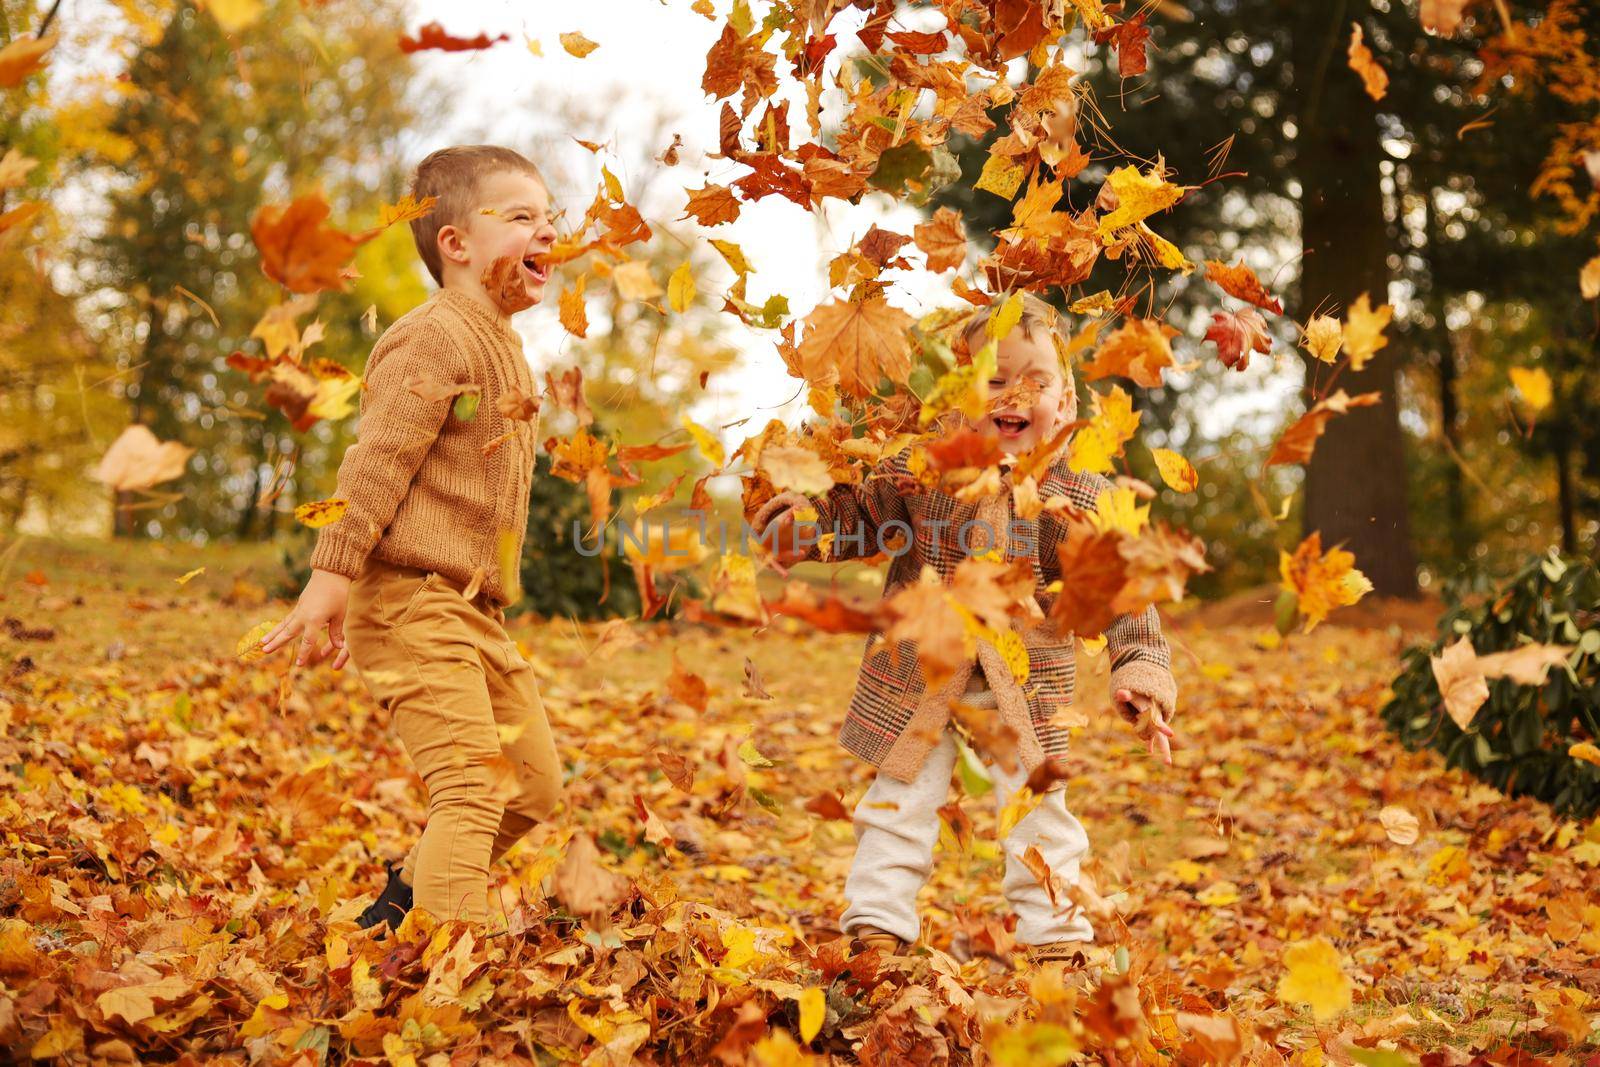 Outdoor fun in autumn. Children playing with autumn fallen leaves in park. Happy little friends